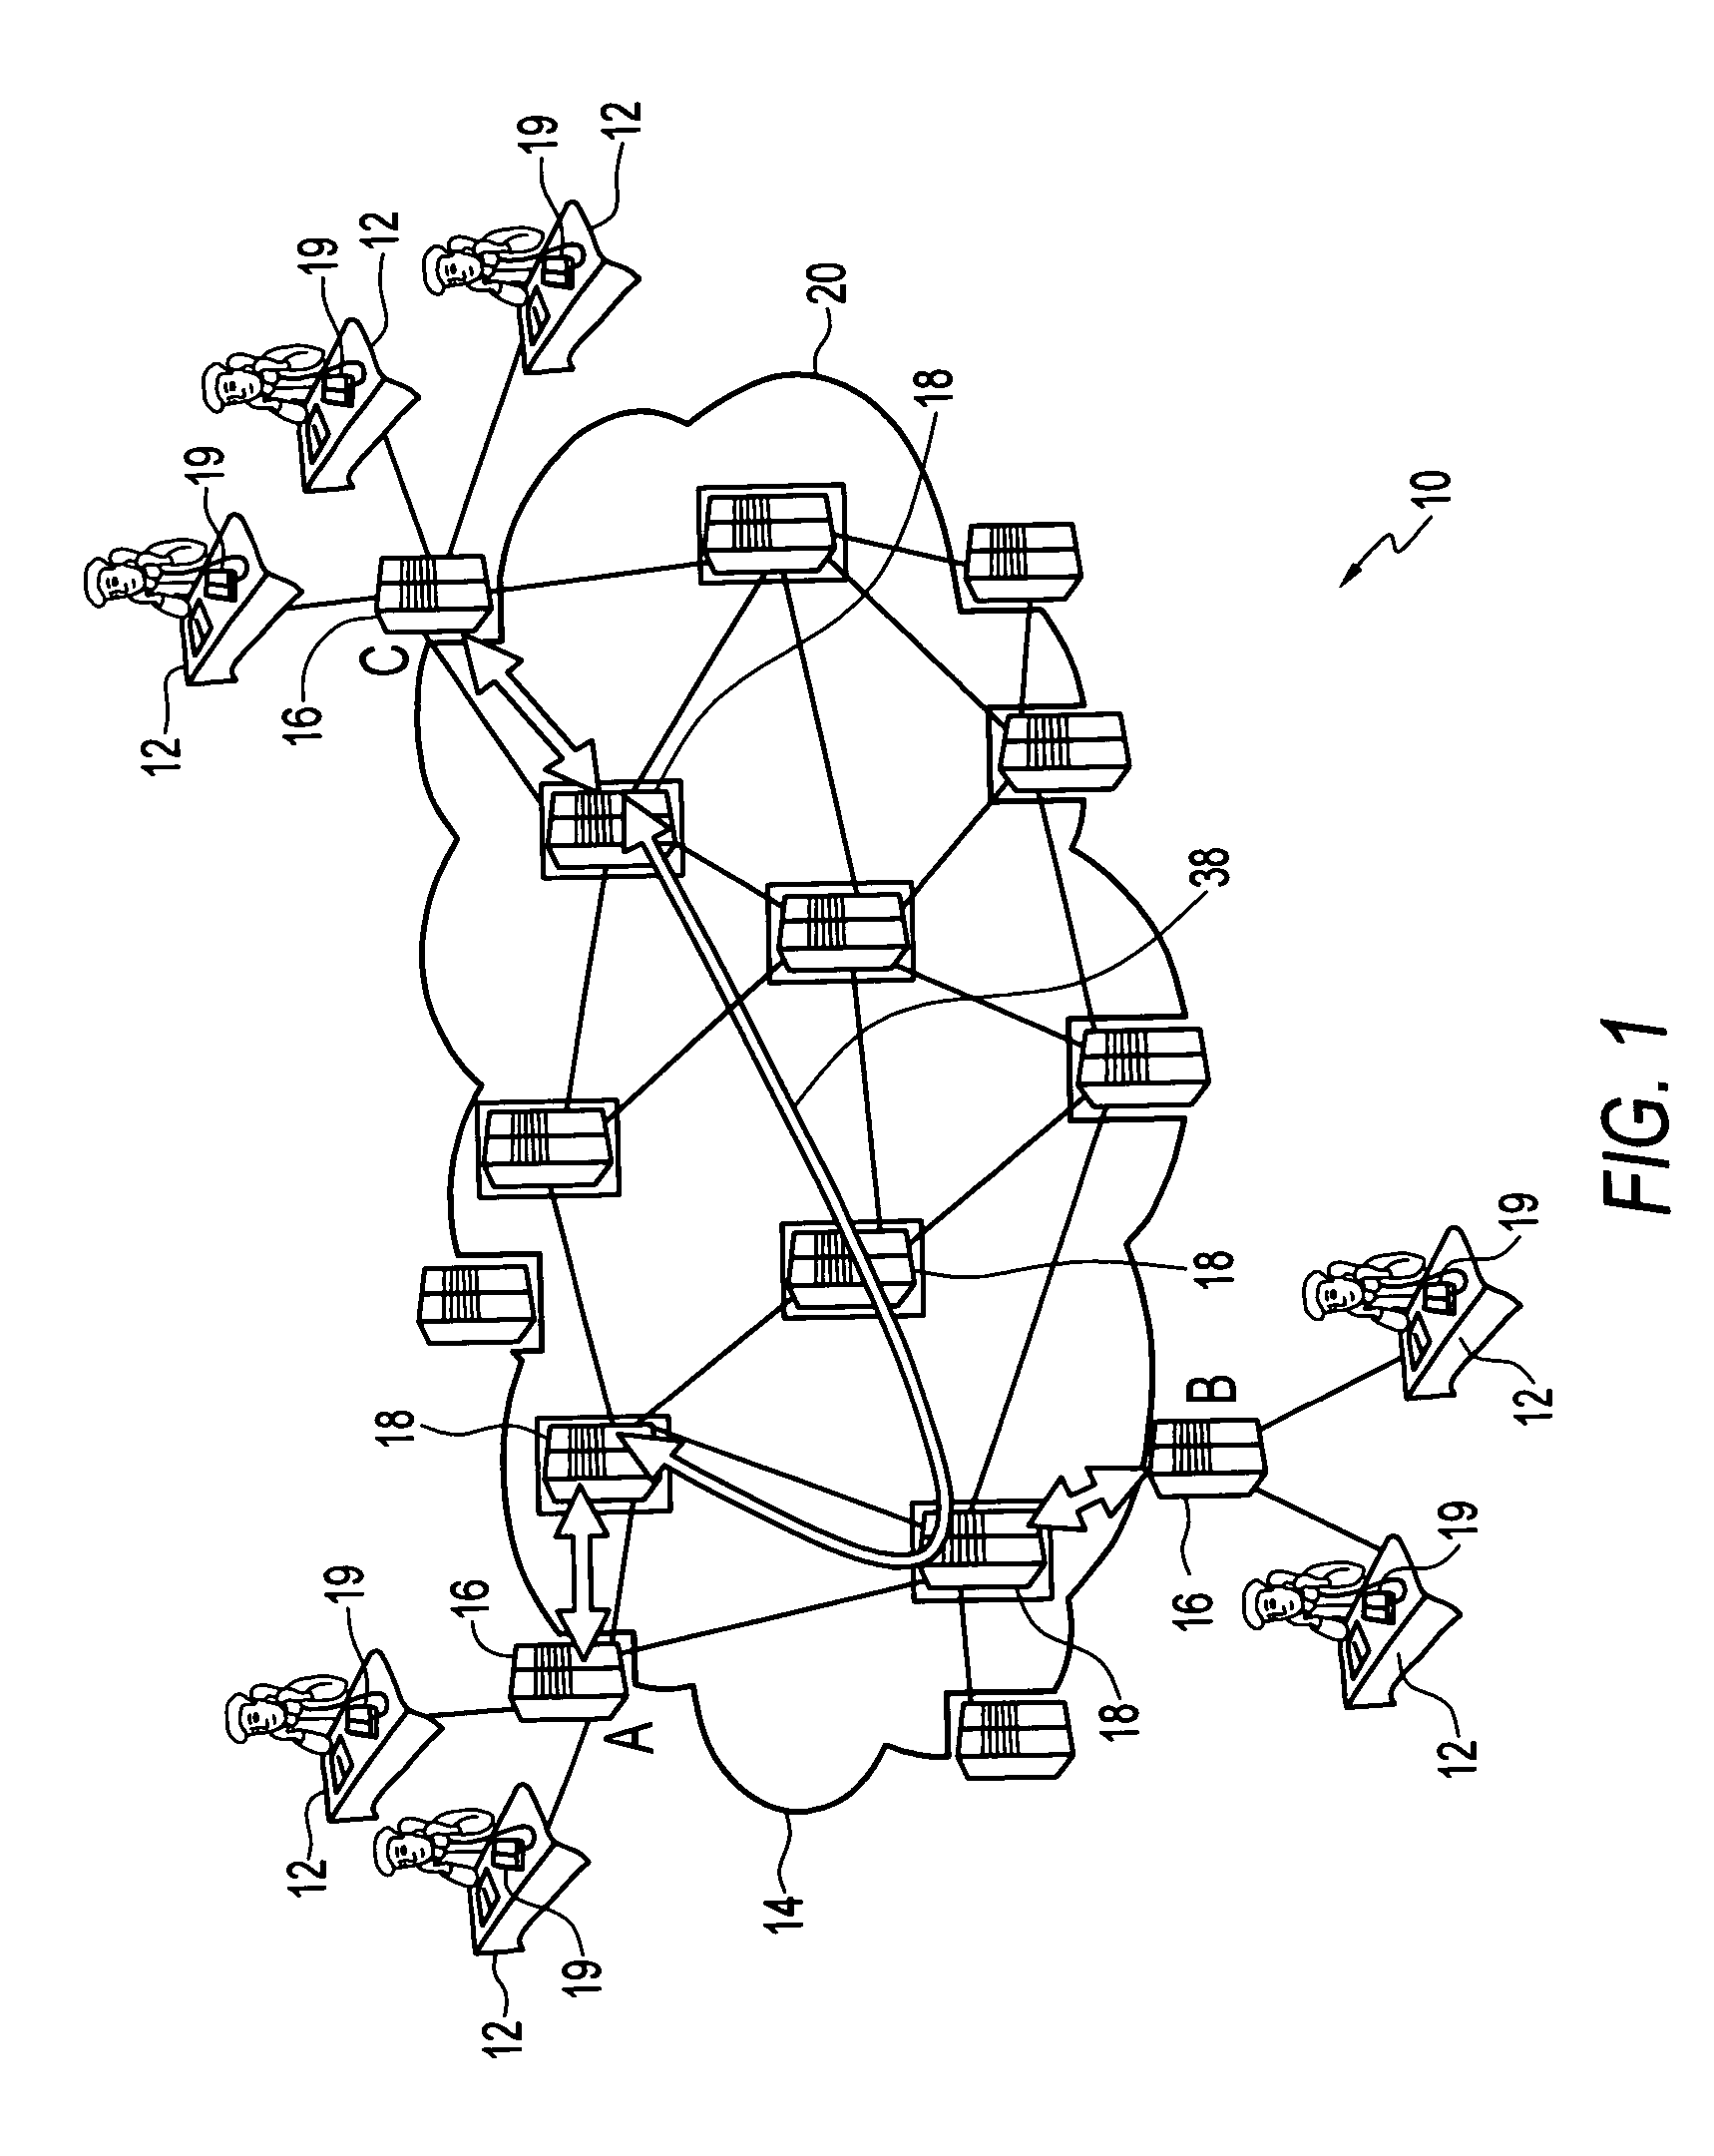 System and apparatus for geographically distributed VoIP conference service with enhanced QoS